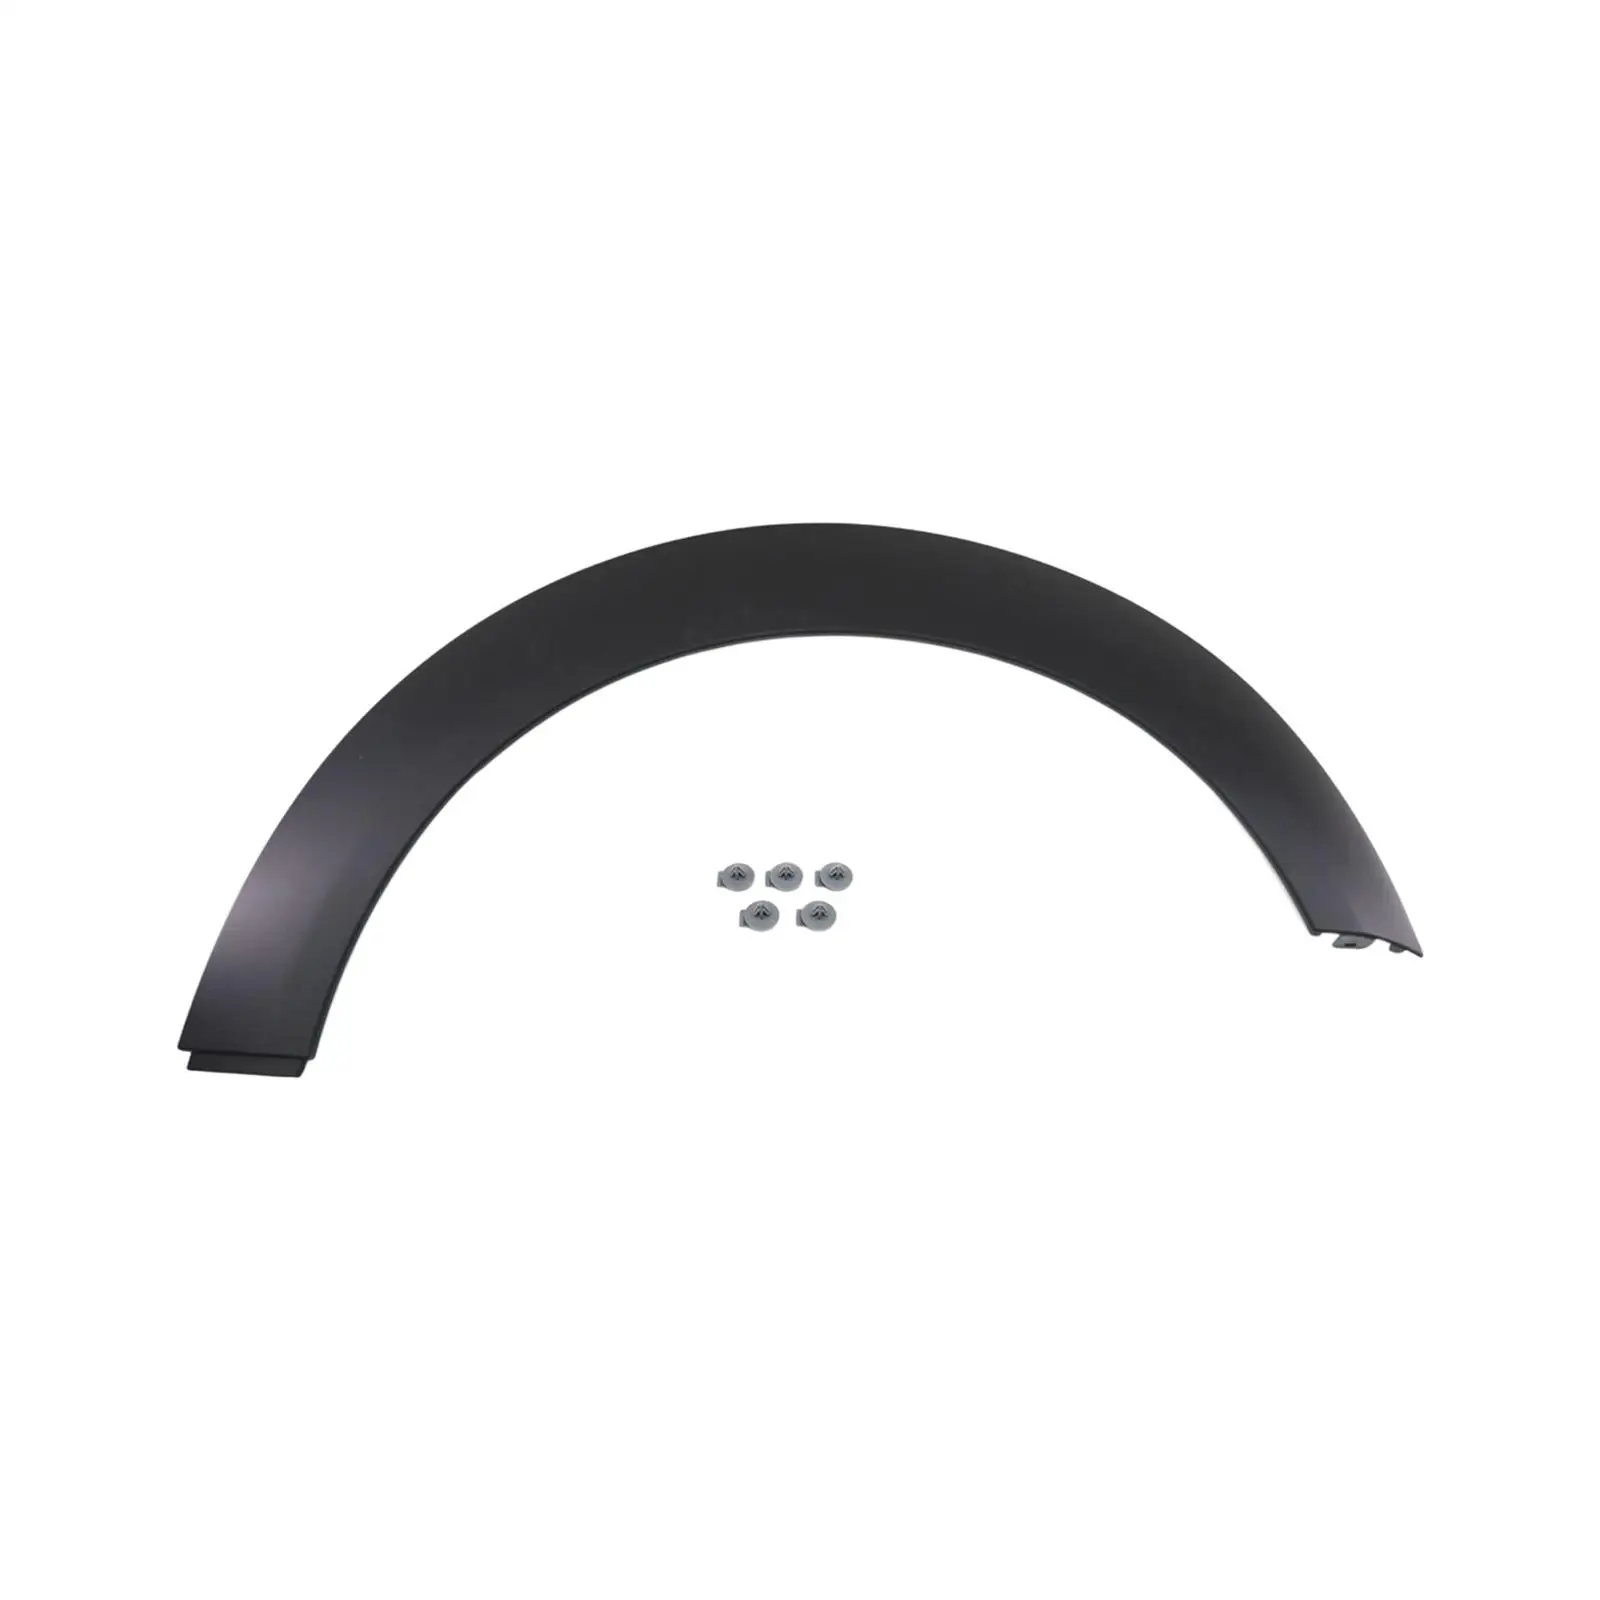 Vehicle Wheel Eyebrow Arch, Black Side Mudguard Mud Flaps Protector, for Mini R56 Durable Accessory